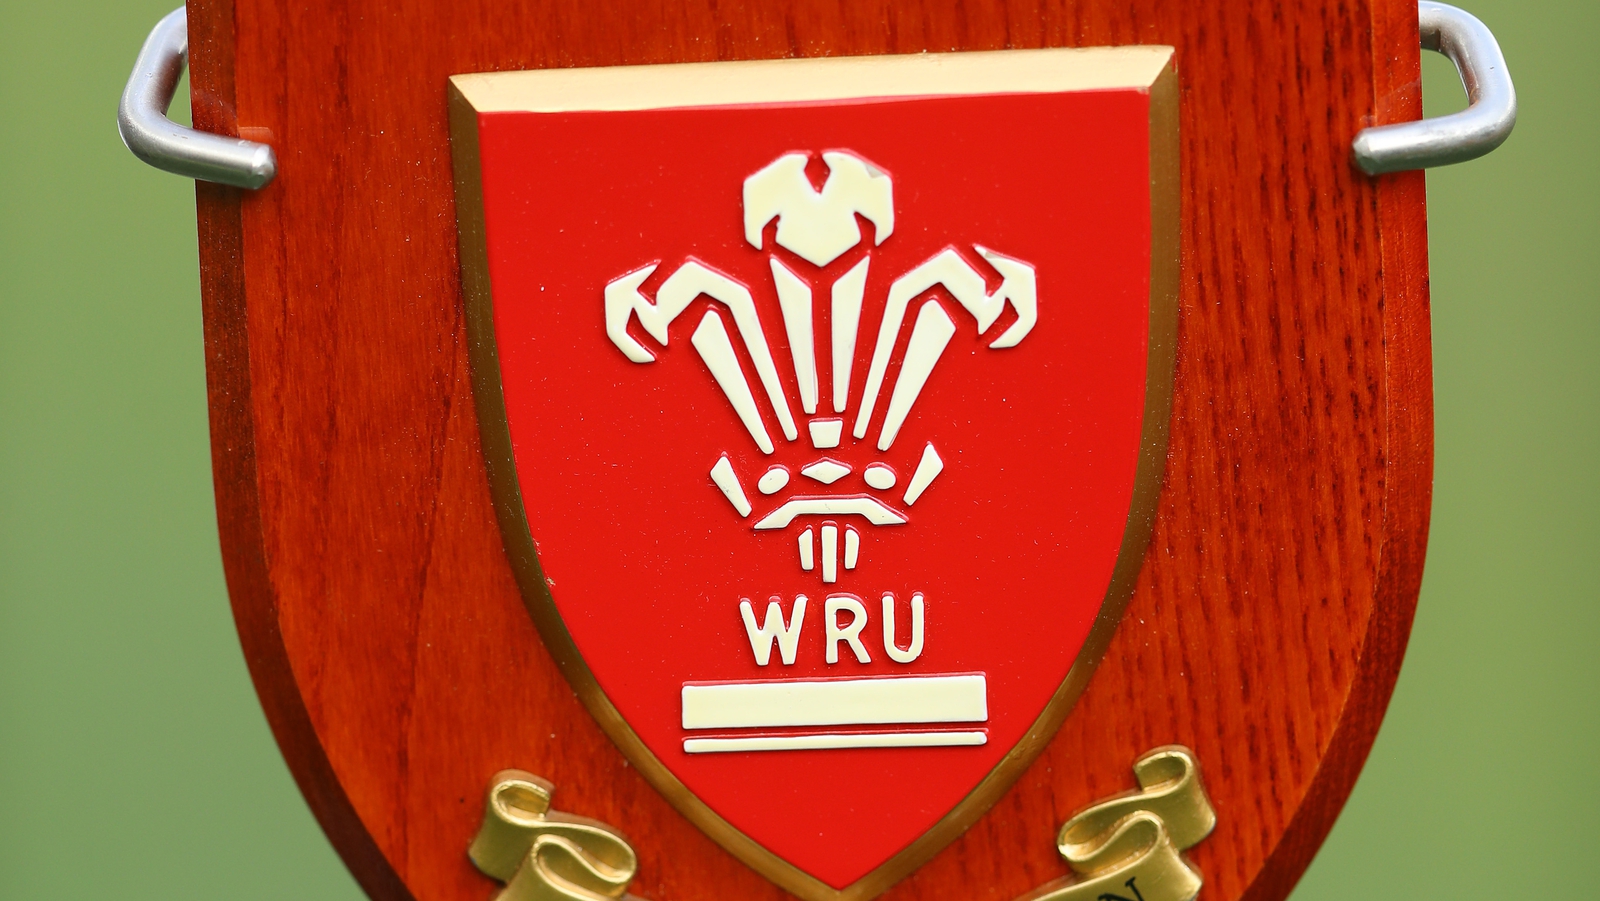 welsh rugby union